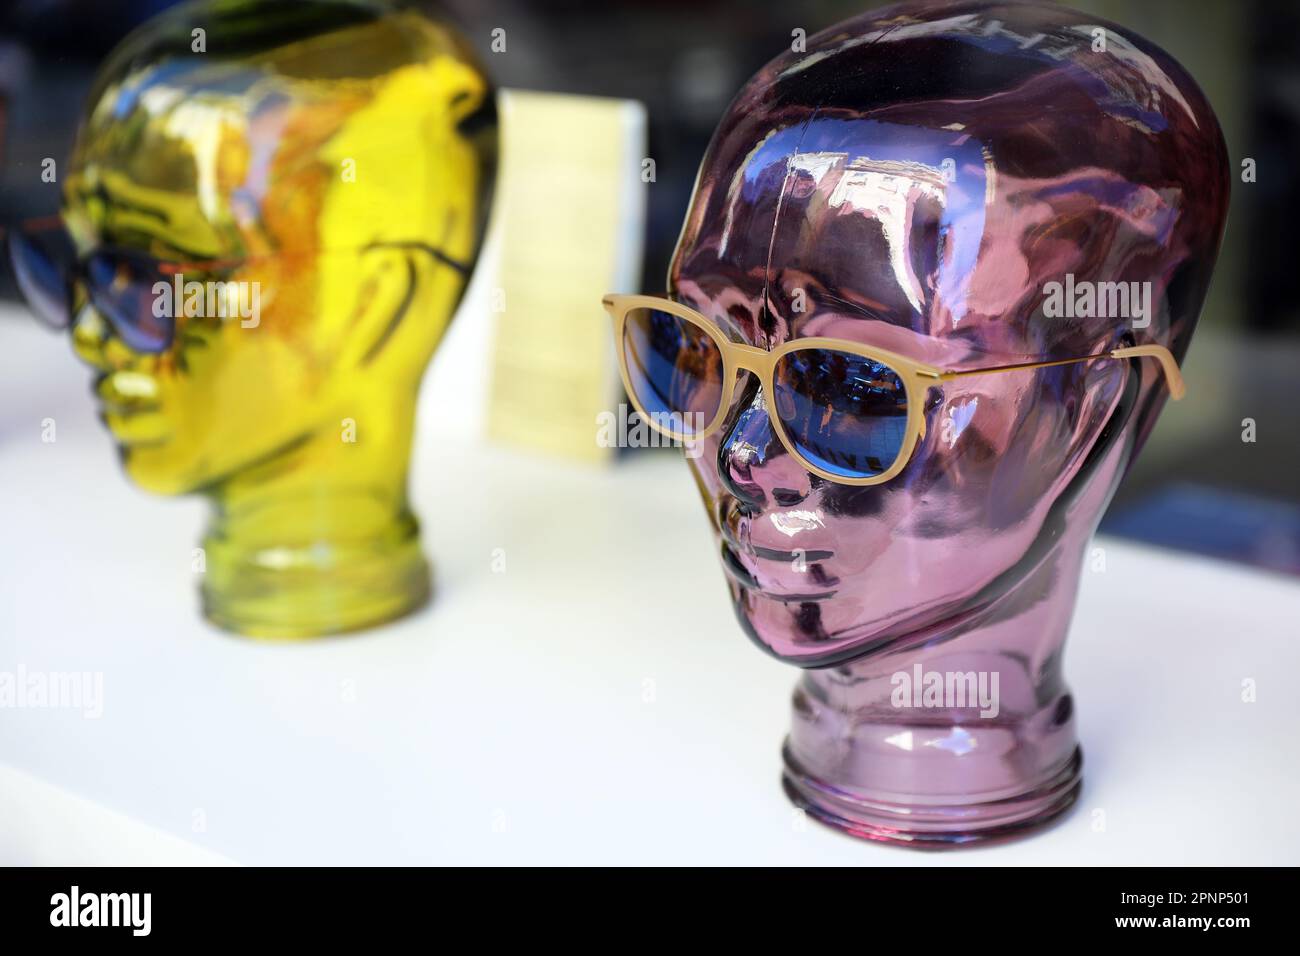 Two colorful glass female heads, tinted in purple and yellow, wearing glasses in an optician's window display Stock Photo